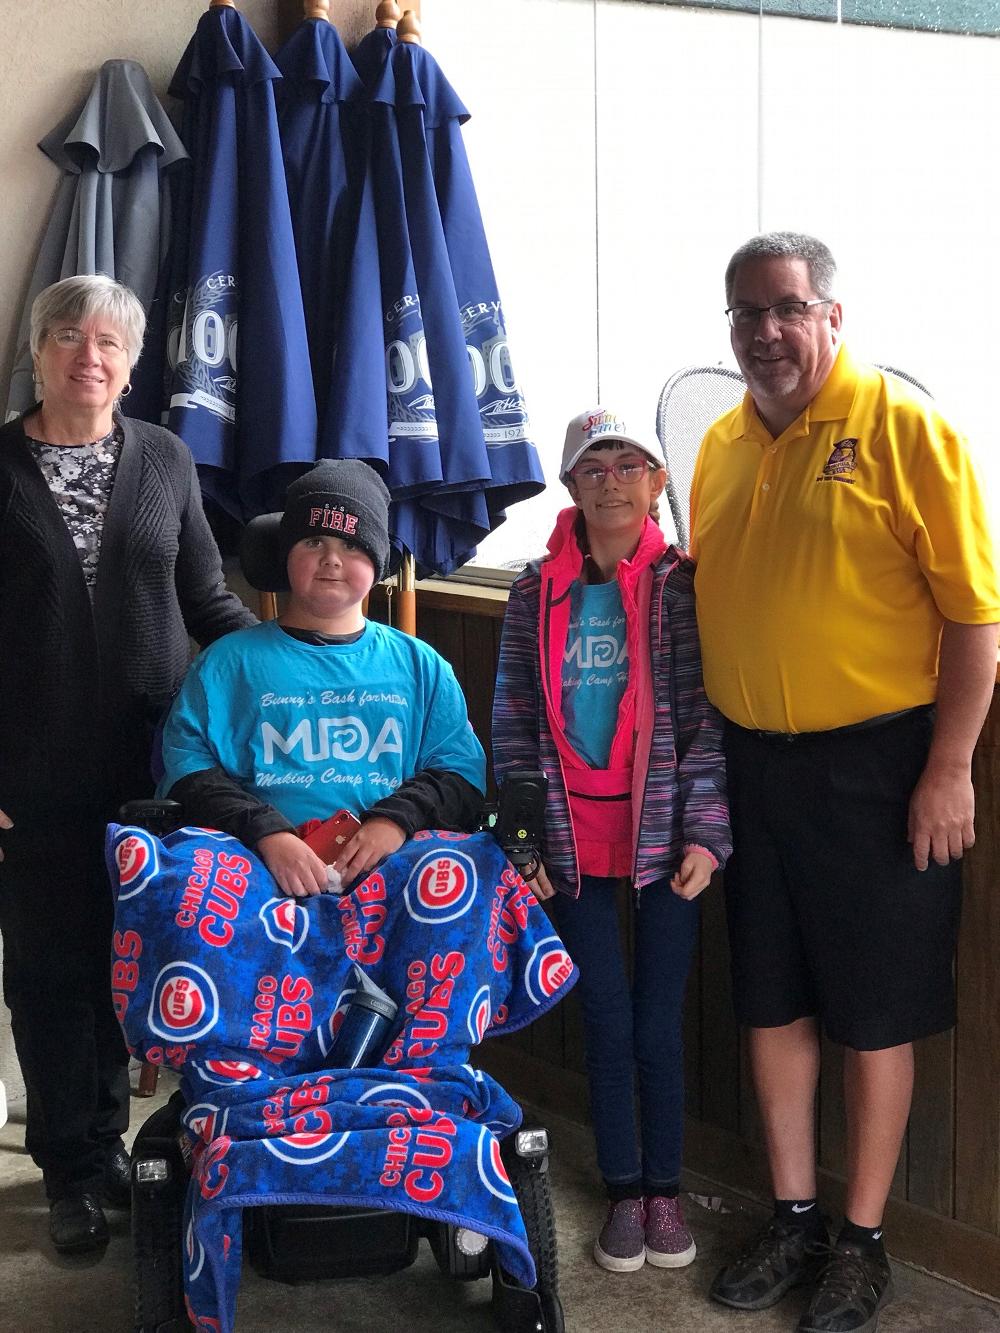 Jeff and Gloria attended the 2019 MDA Fundraiser, representing the Champaign-Urbana Elks Lodge 2497, shown here with Jordan and Summer. This event was held at Bunny's Tavern in Urbana.